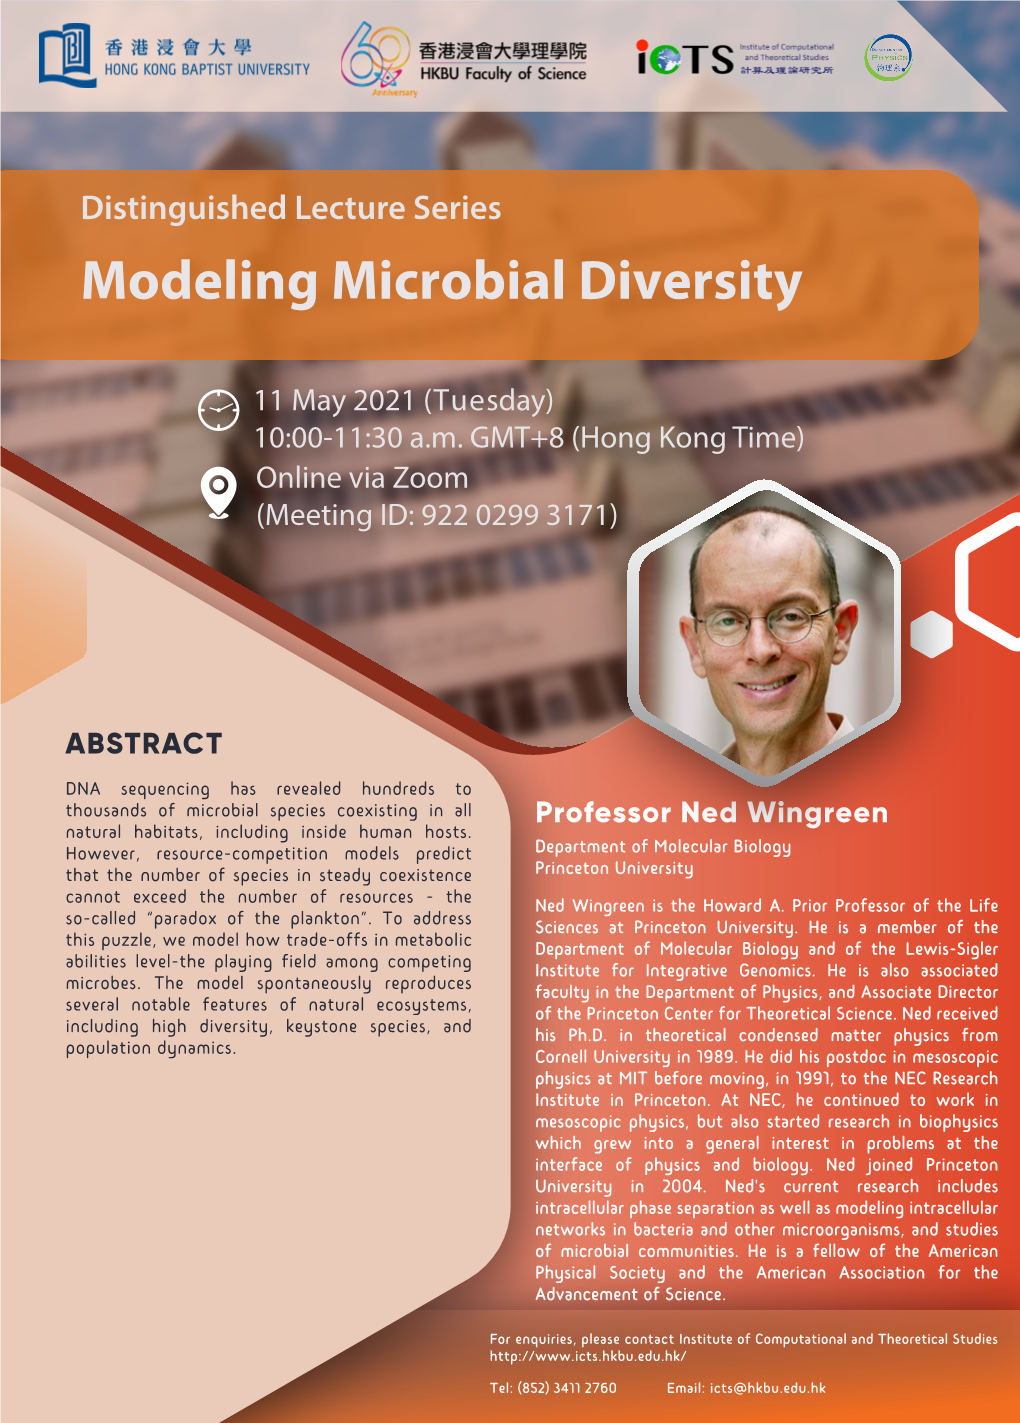 Modeling Microbial Diversity